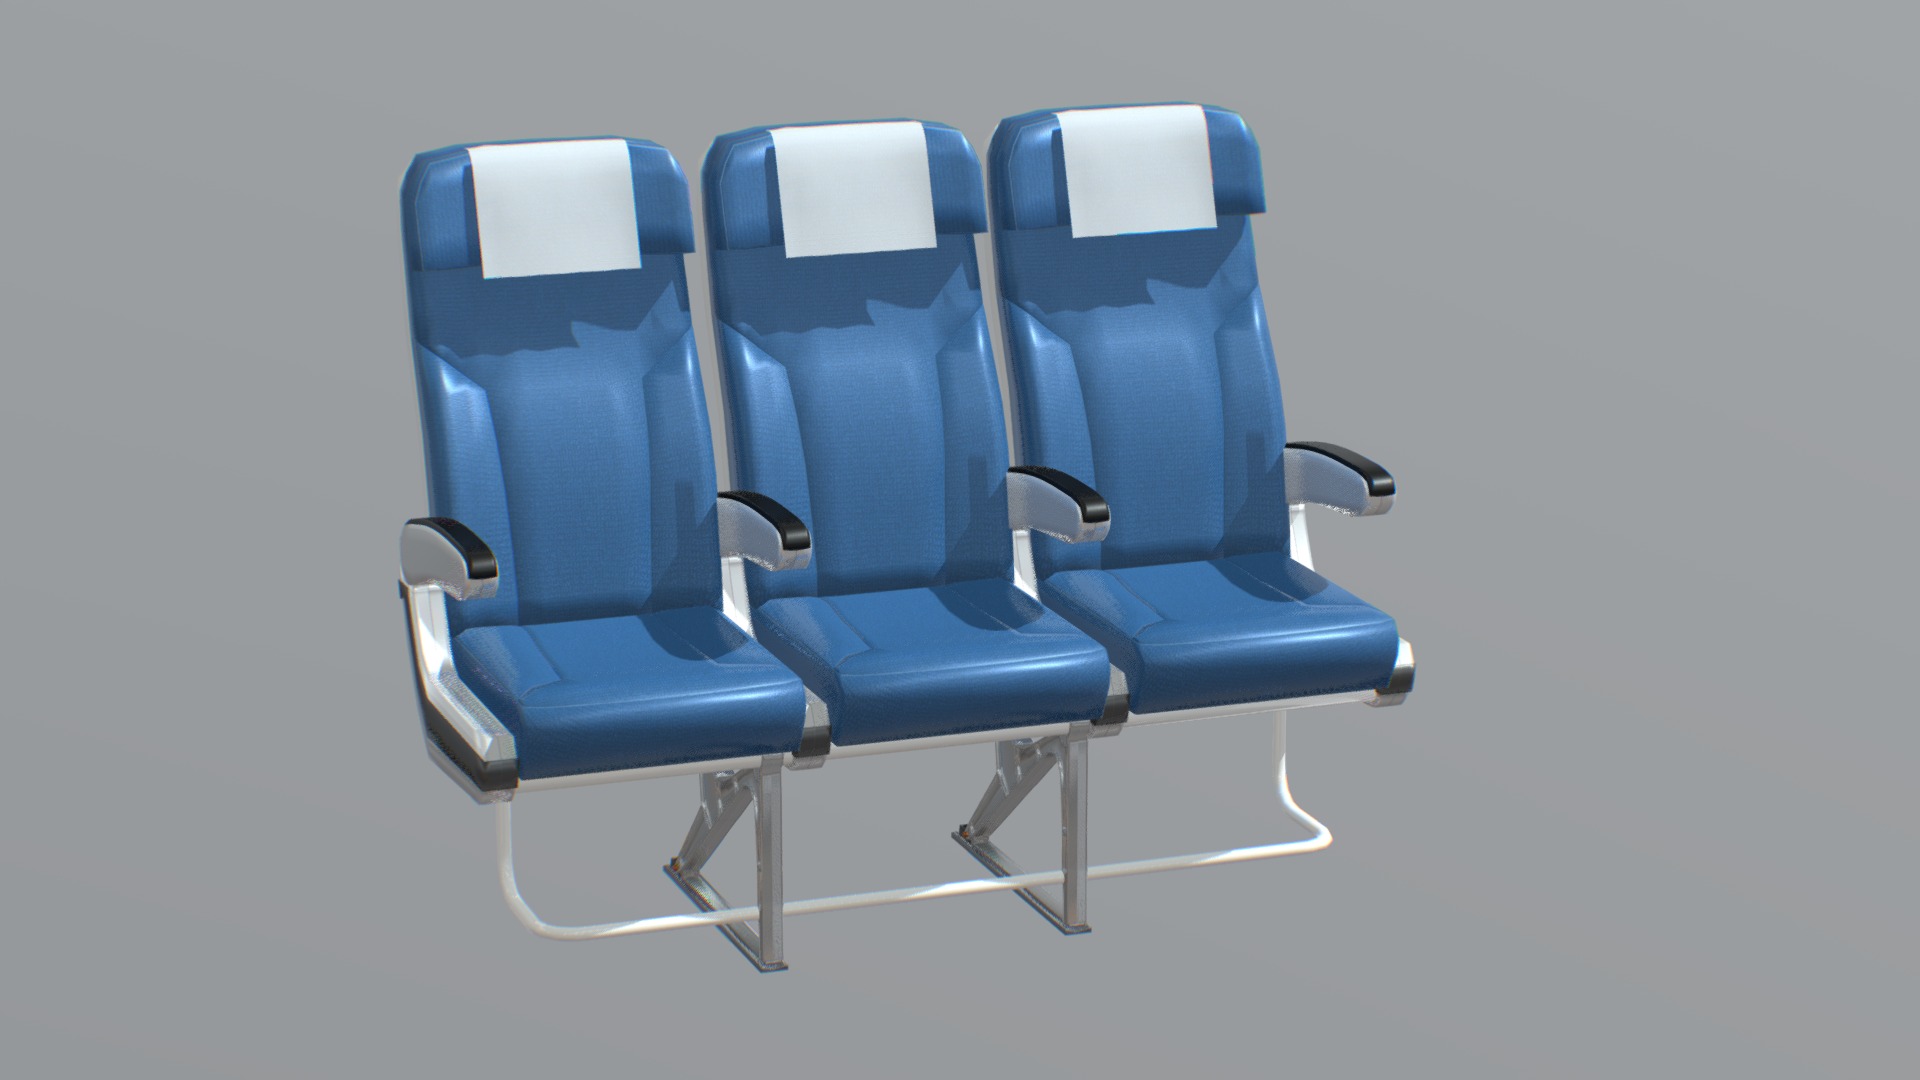 3D model Aircraft Chair v2 - This is a 3D model of the Aircraft Chair v2. The 3D model is about a group of blue chairs.